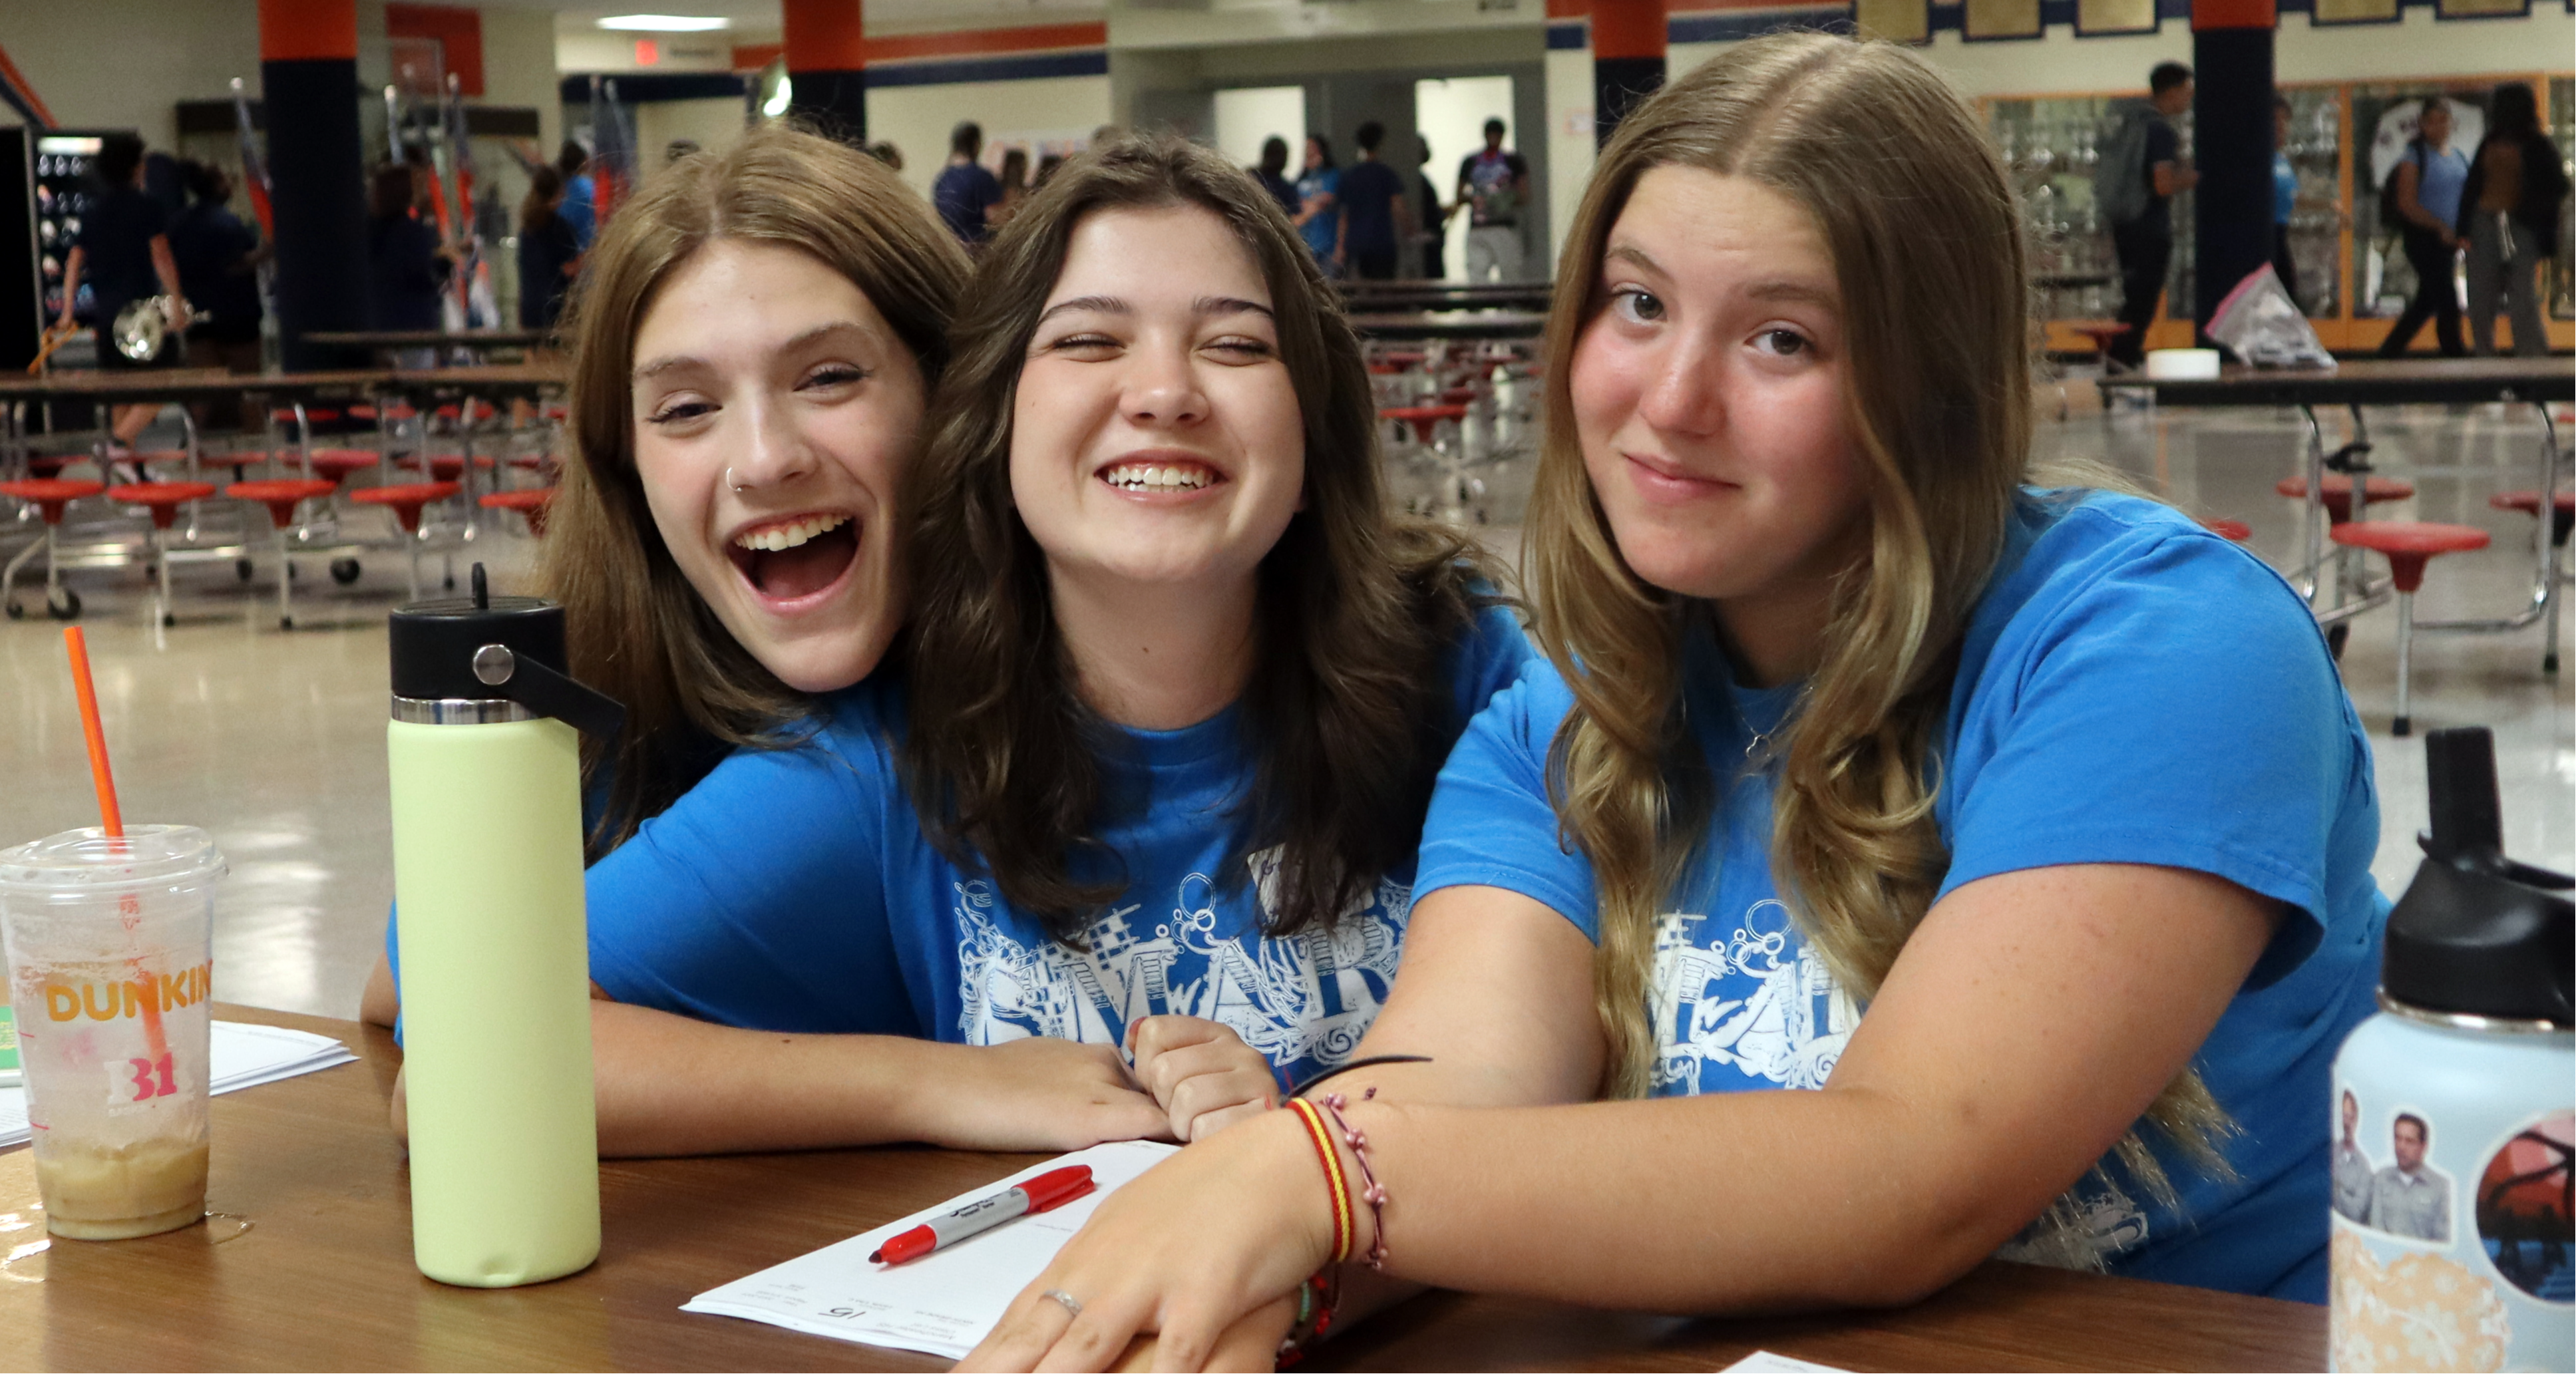 Three girls smiling while sitting in the school cafeteria